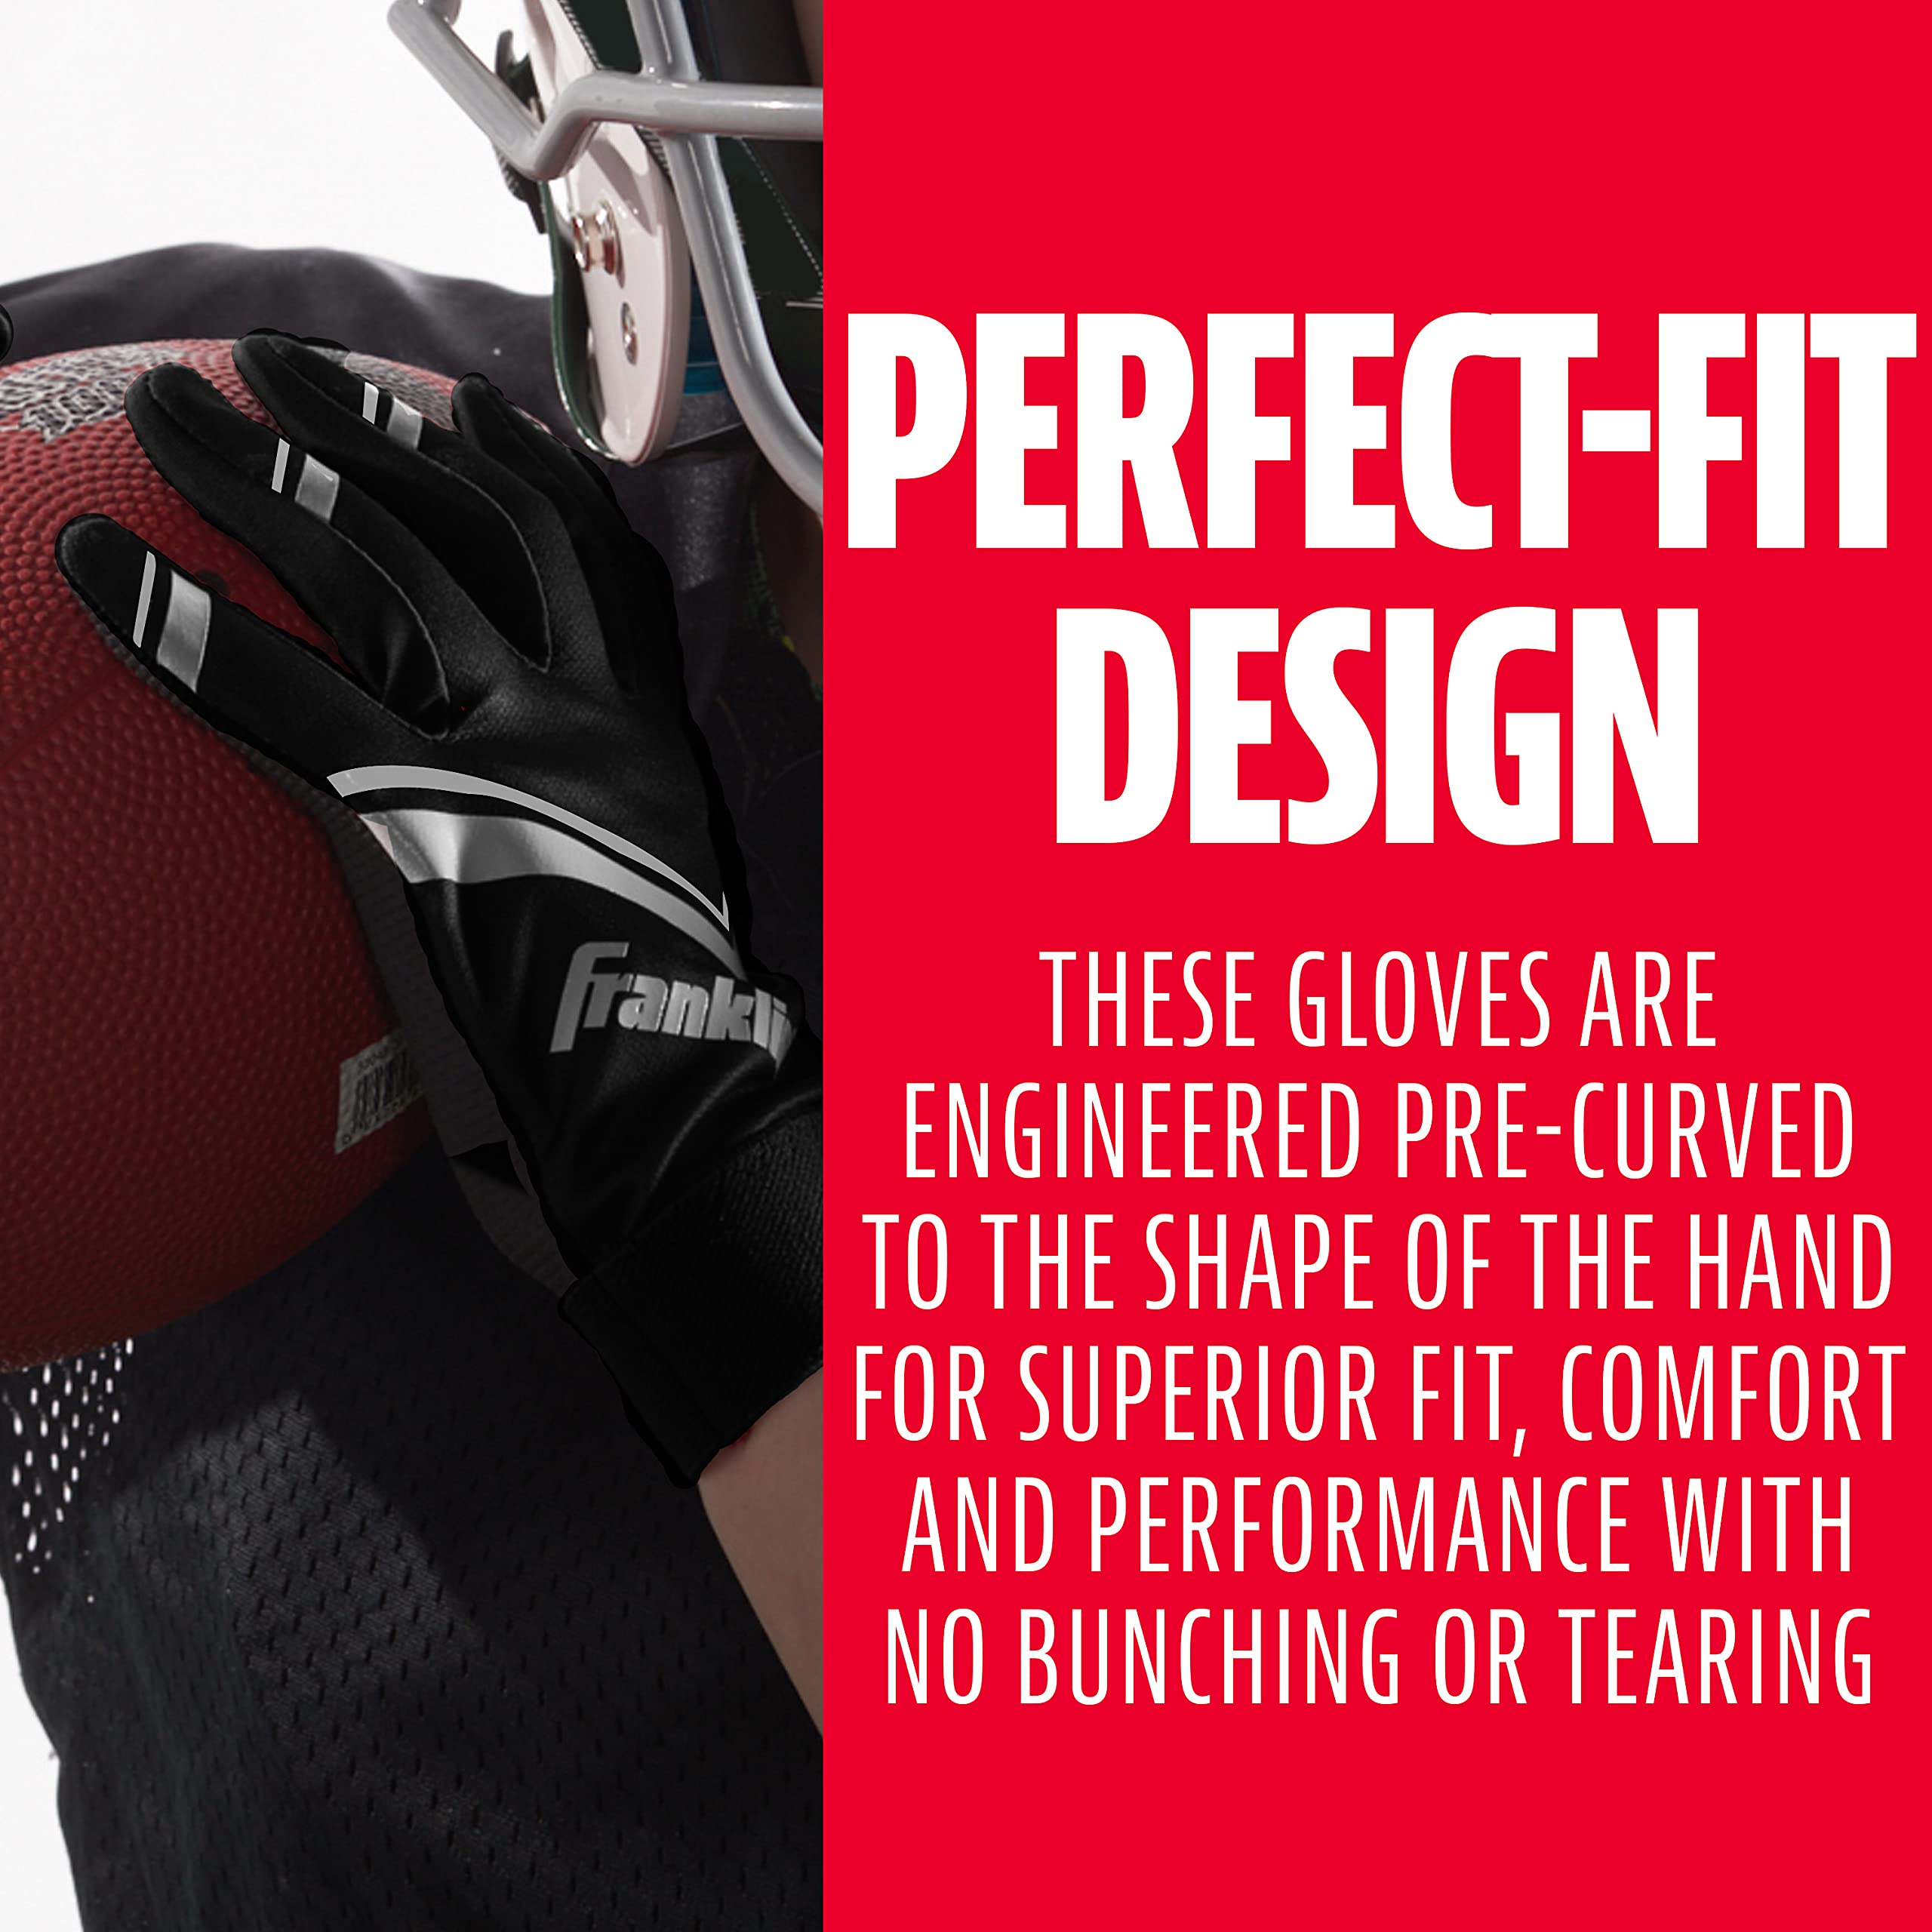 Franklin Sports Youth Football Receiver Gloves - Shoktak Youth Gloves - Kids Football Receiver Gloves - High Grip Football Gloves for Kids